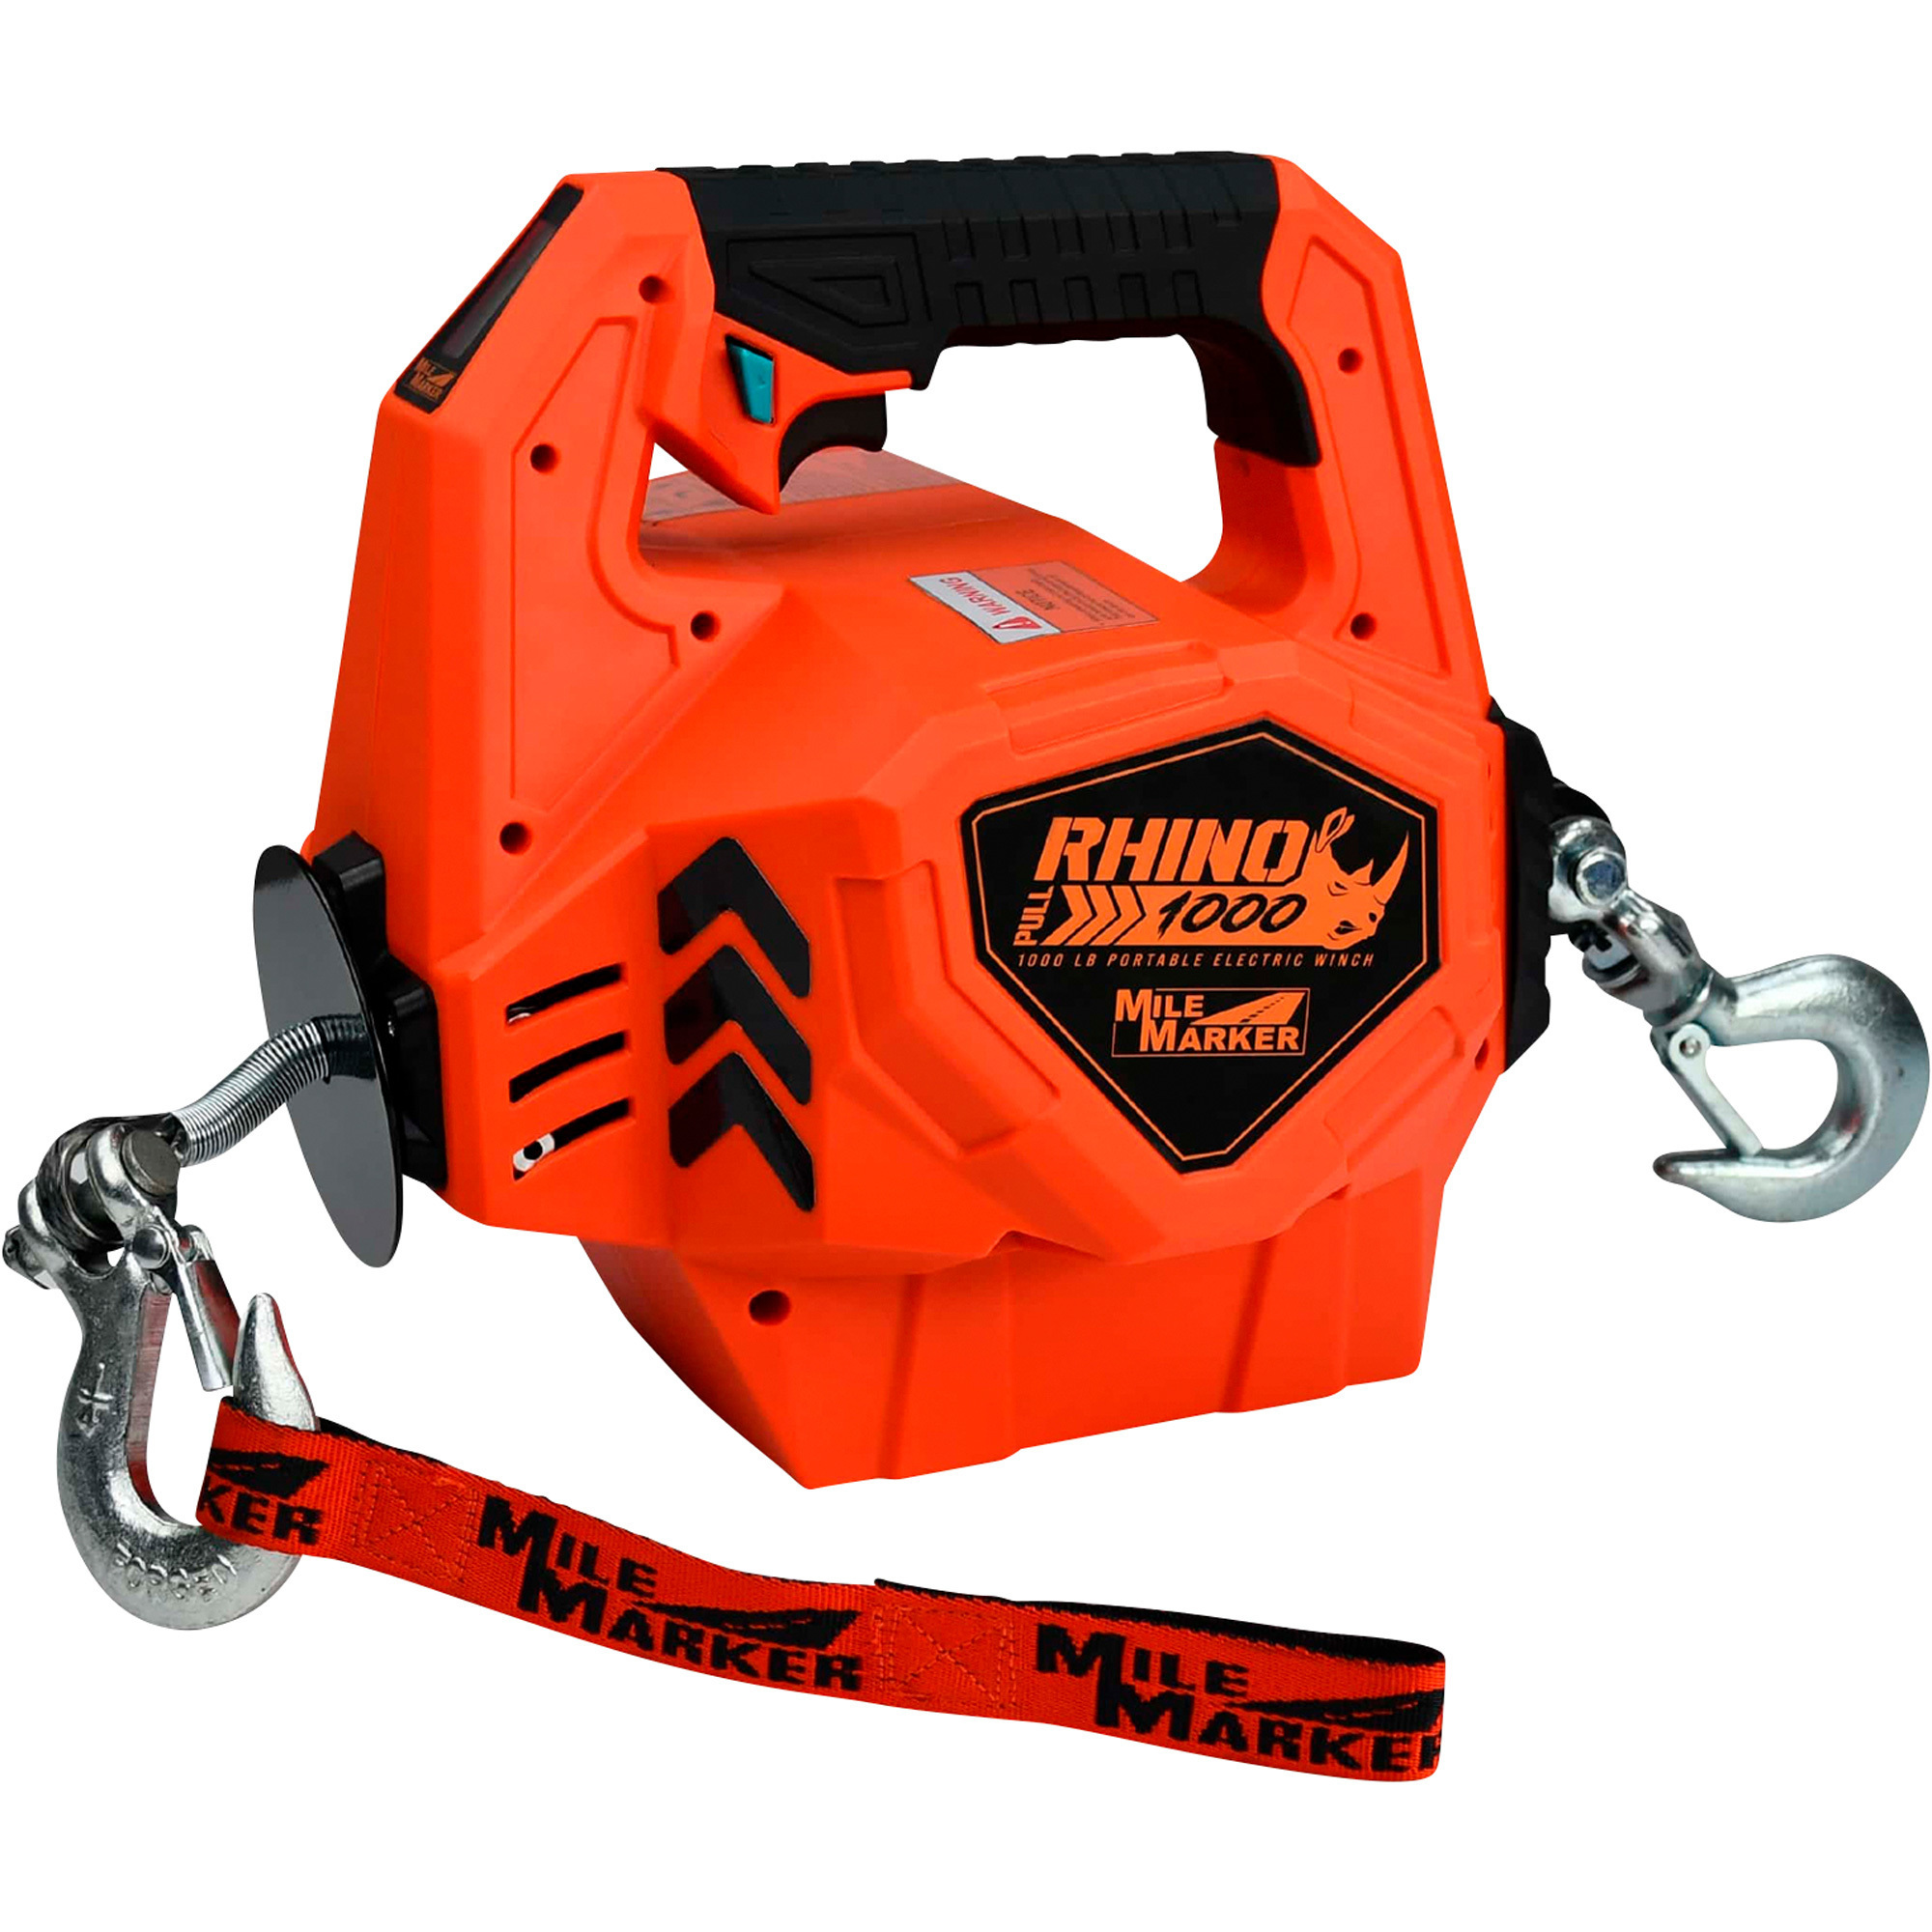 Mile Marker Rhino Pull 1000 24 Volt DC Portable Winch, 1,000-Lb. Capacity, 39ft. Synthetic Rope, Model 71-1000